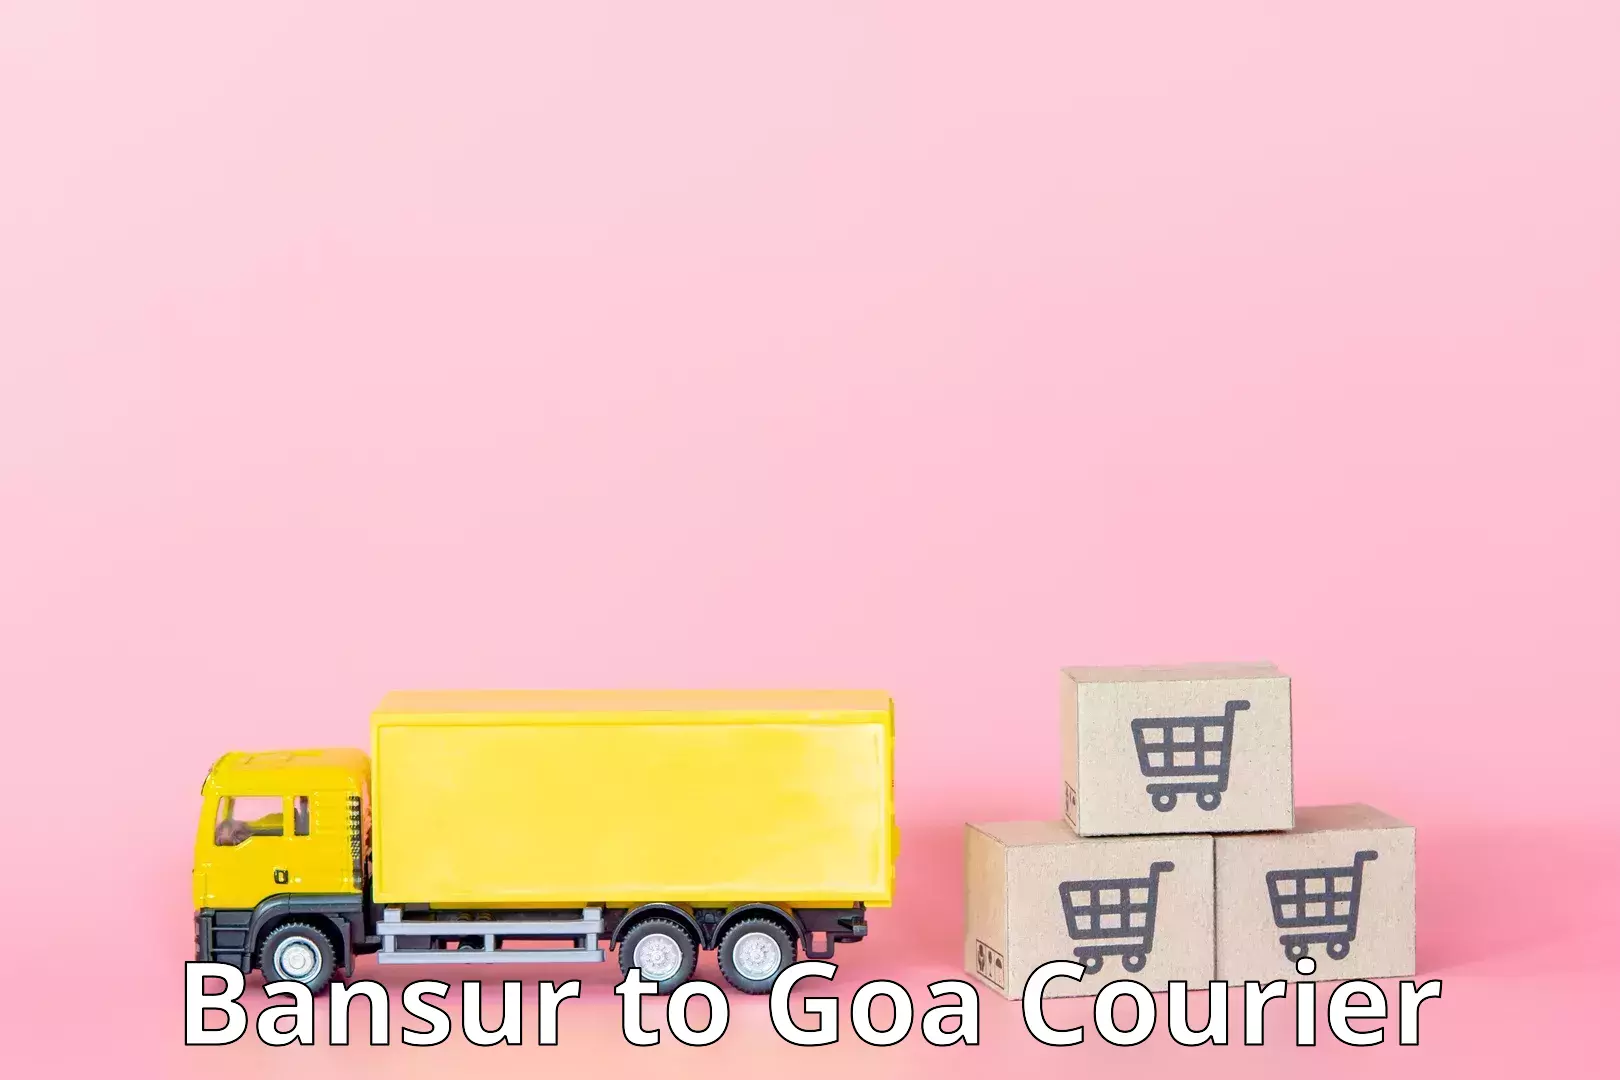 Global shipping networks Bansur to South Goa